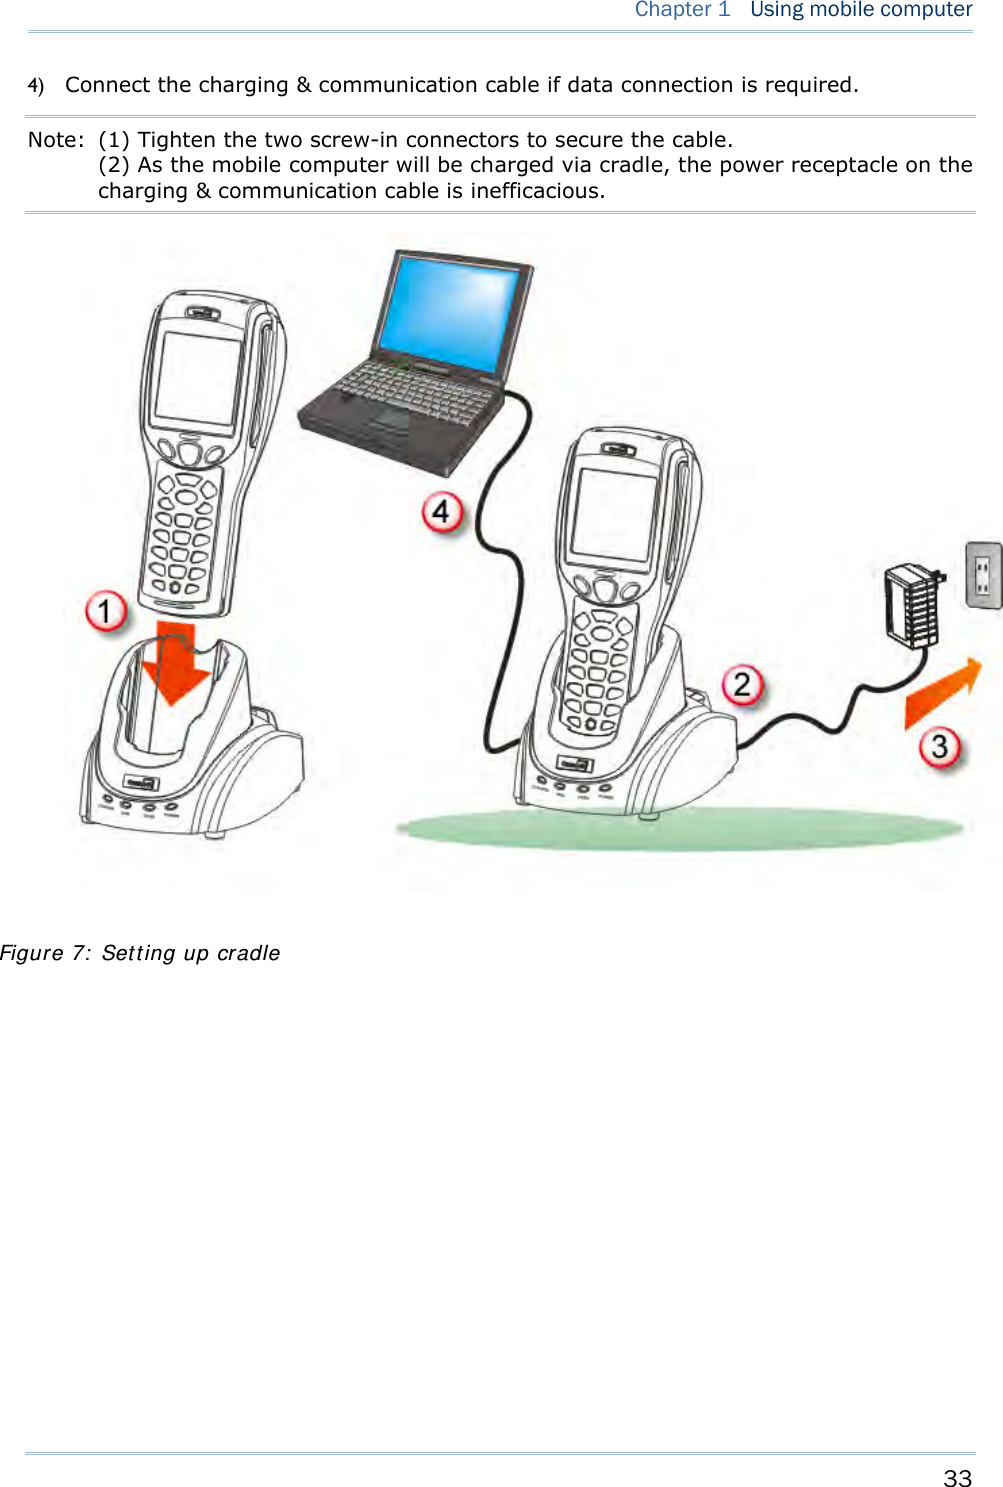     33   Chapter 1   Using mobile computer  4) Connect the charging &amp; communication cable if data connection is required. Note:  (1) Tighten the two screw-in connectors to secure the cable. (2) As the mobile computer will be charged via cradle, the power receptacle on the charging &amp; communication cable is inefficacious.     Figure 7: Setting up cradle 